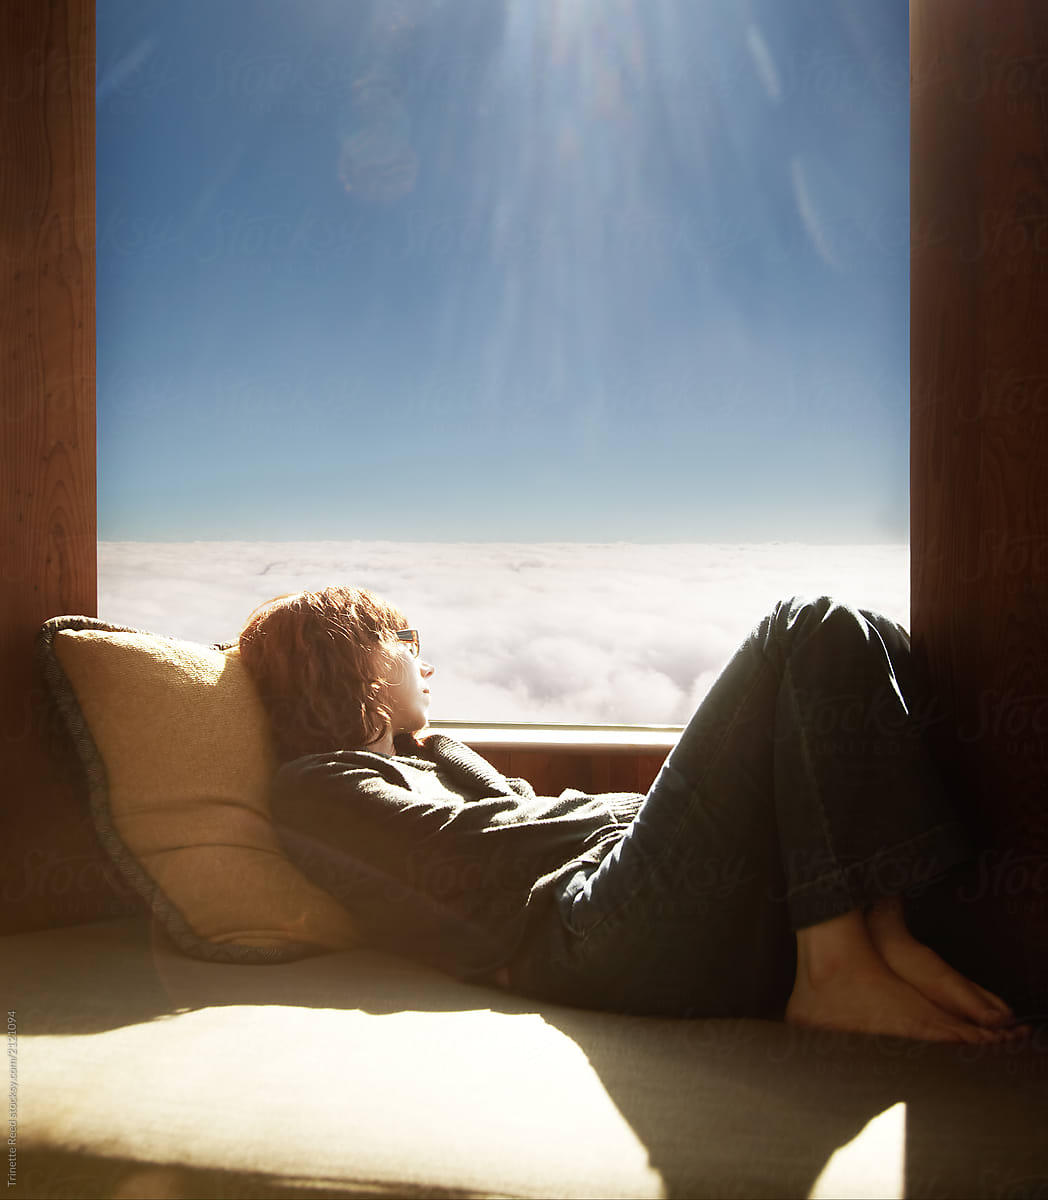 Woman relaxing in cabin on mountain above the fog/ clouds in California